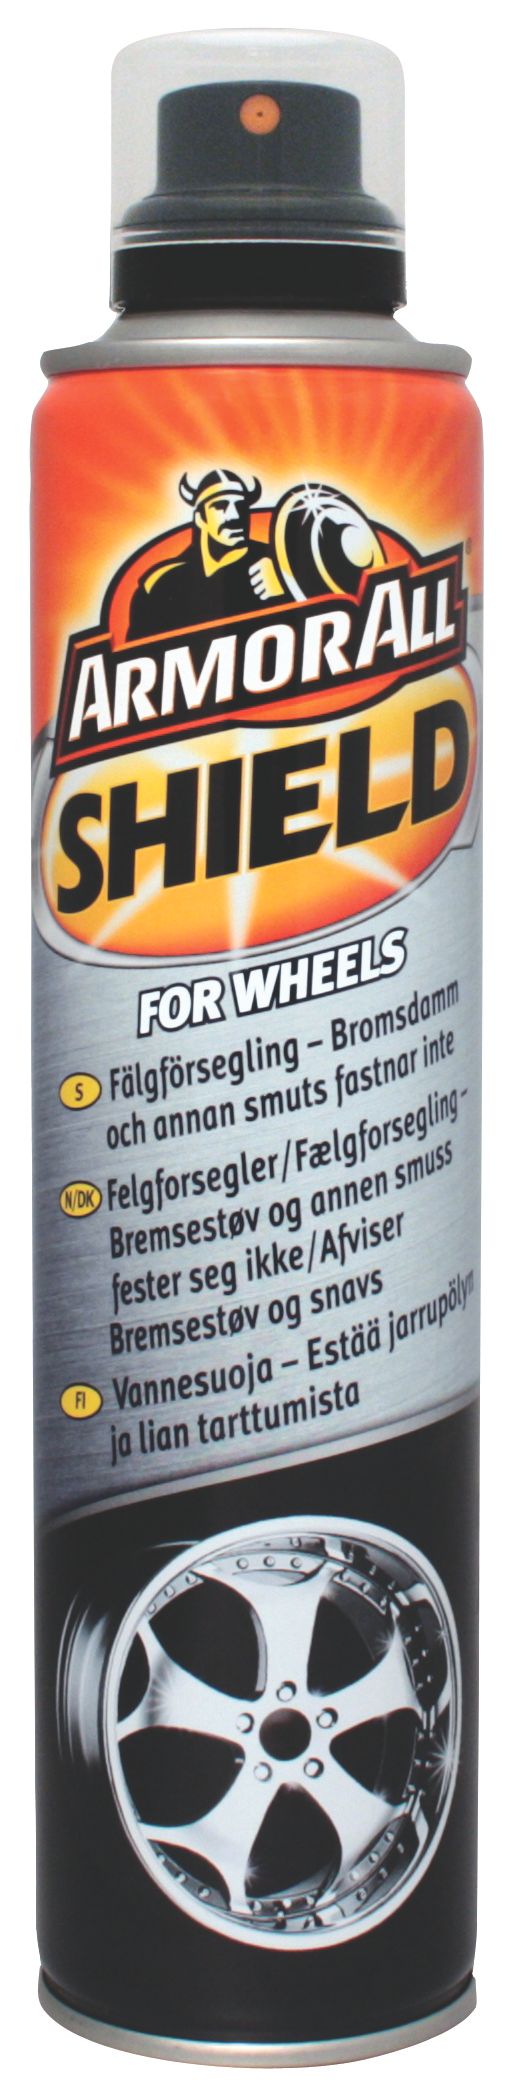 Armor All Shield For Wheels